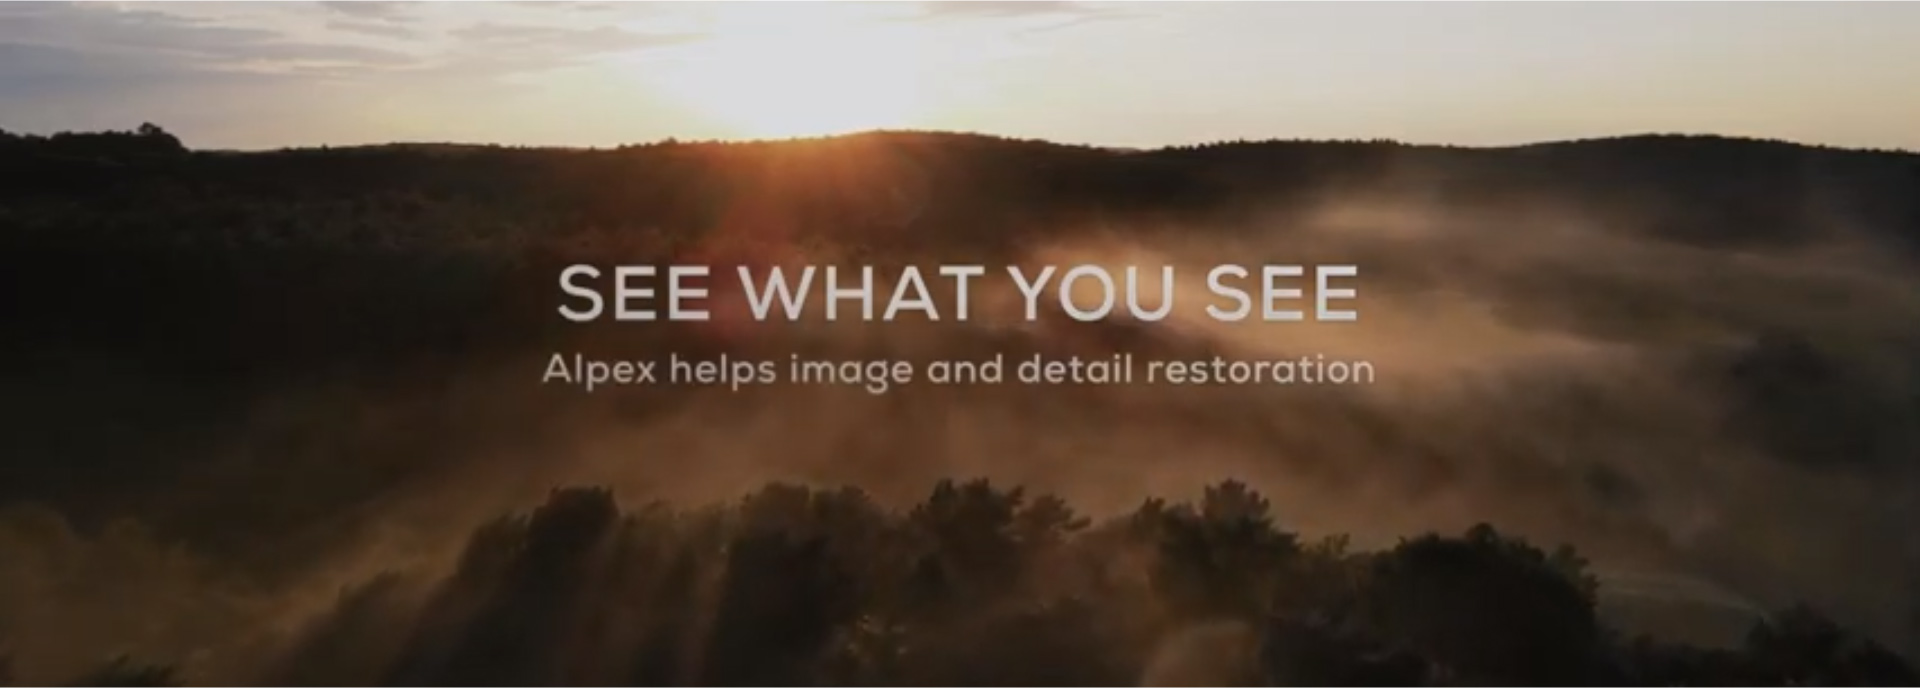 An image advertising the Hikmciro slogan 'See What You See'. The slogan is placed over a rising or setting over a forest or hilltop.